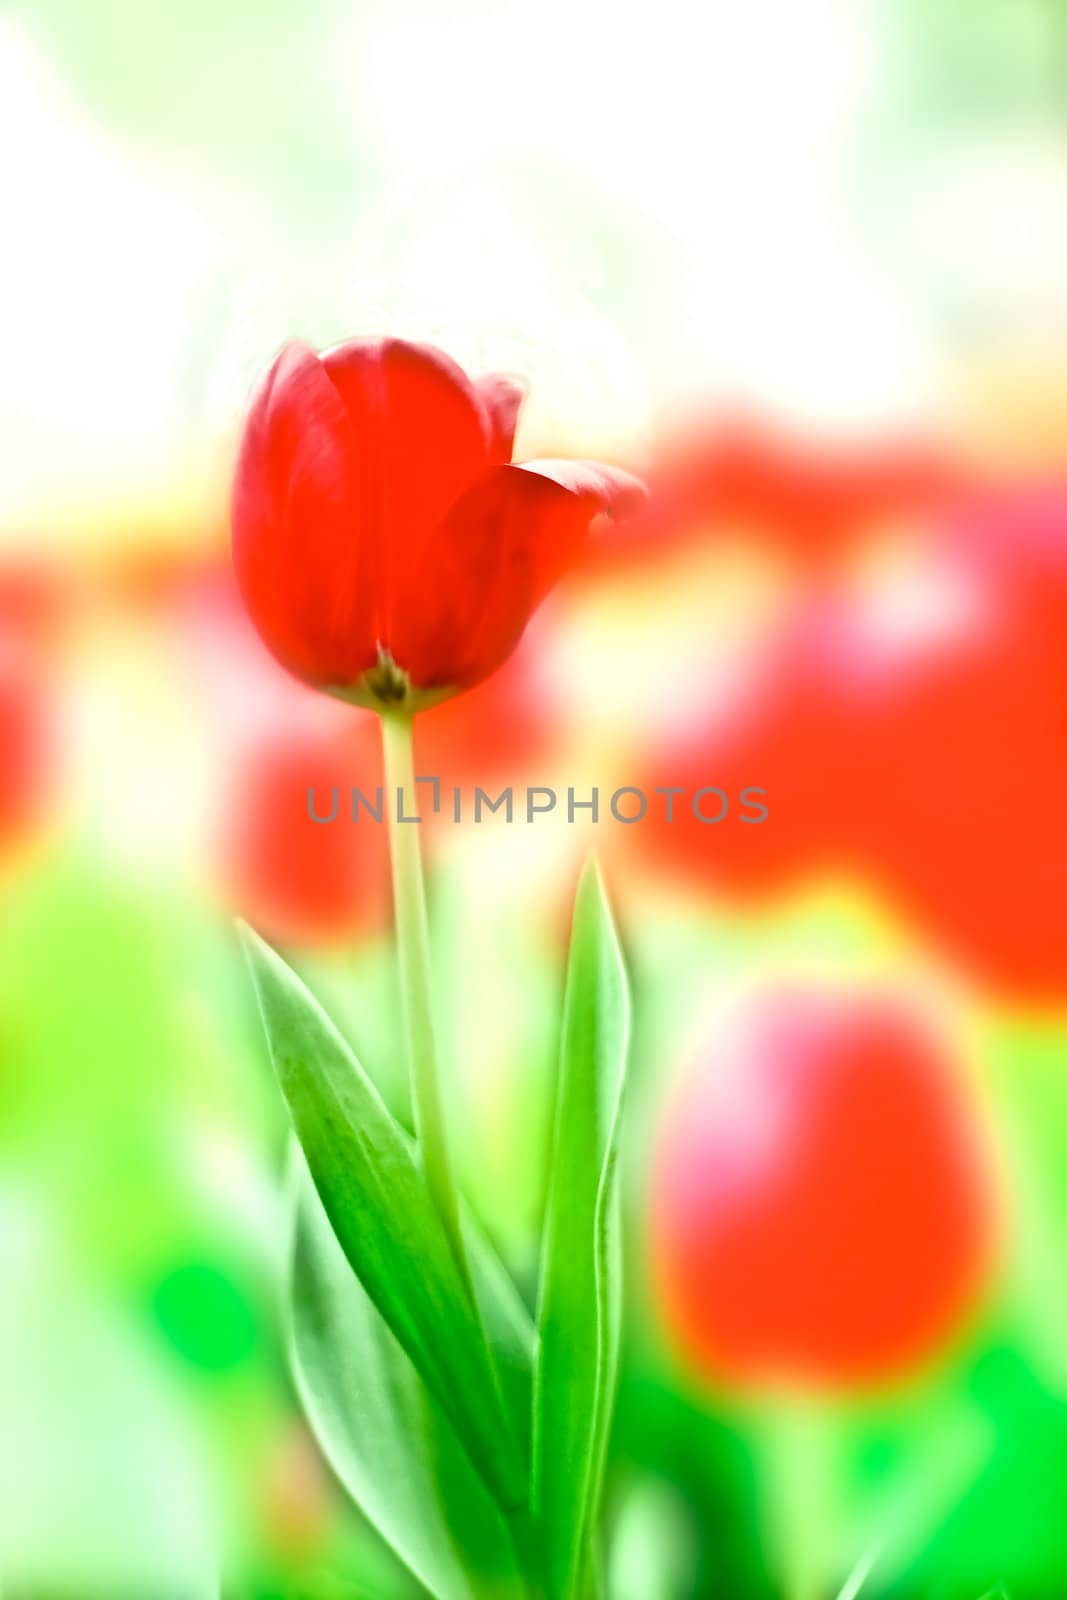 A Tulip in flowerbed with blurred background